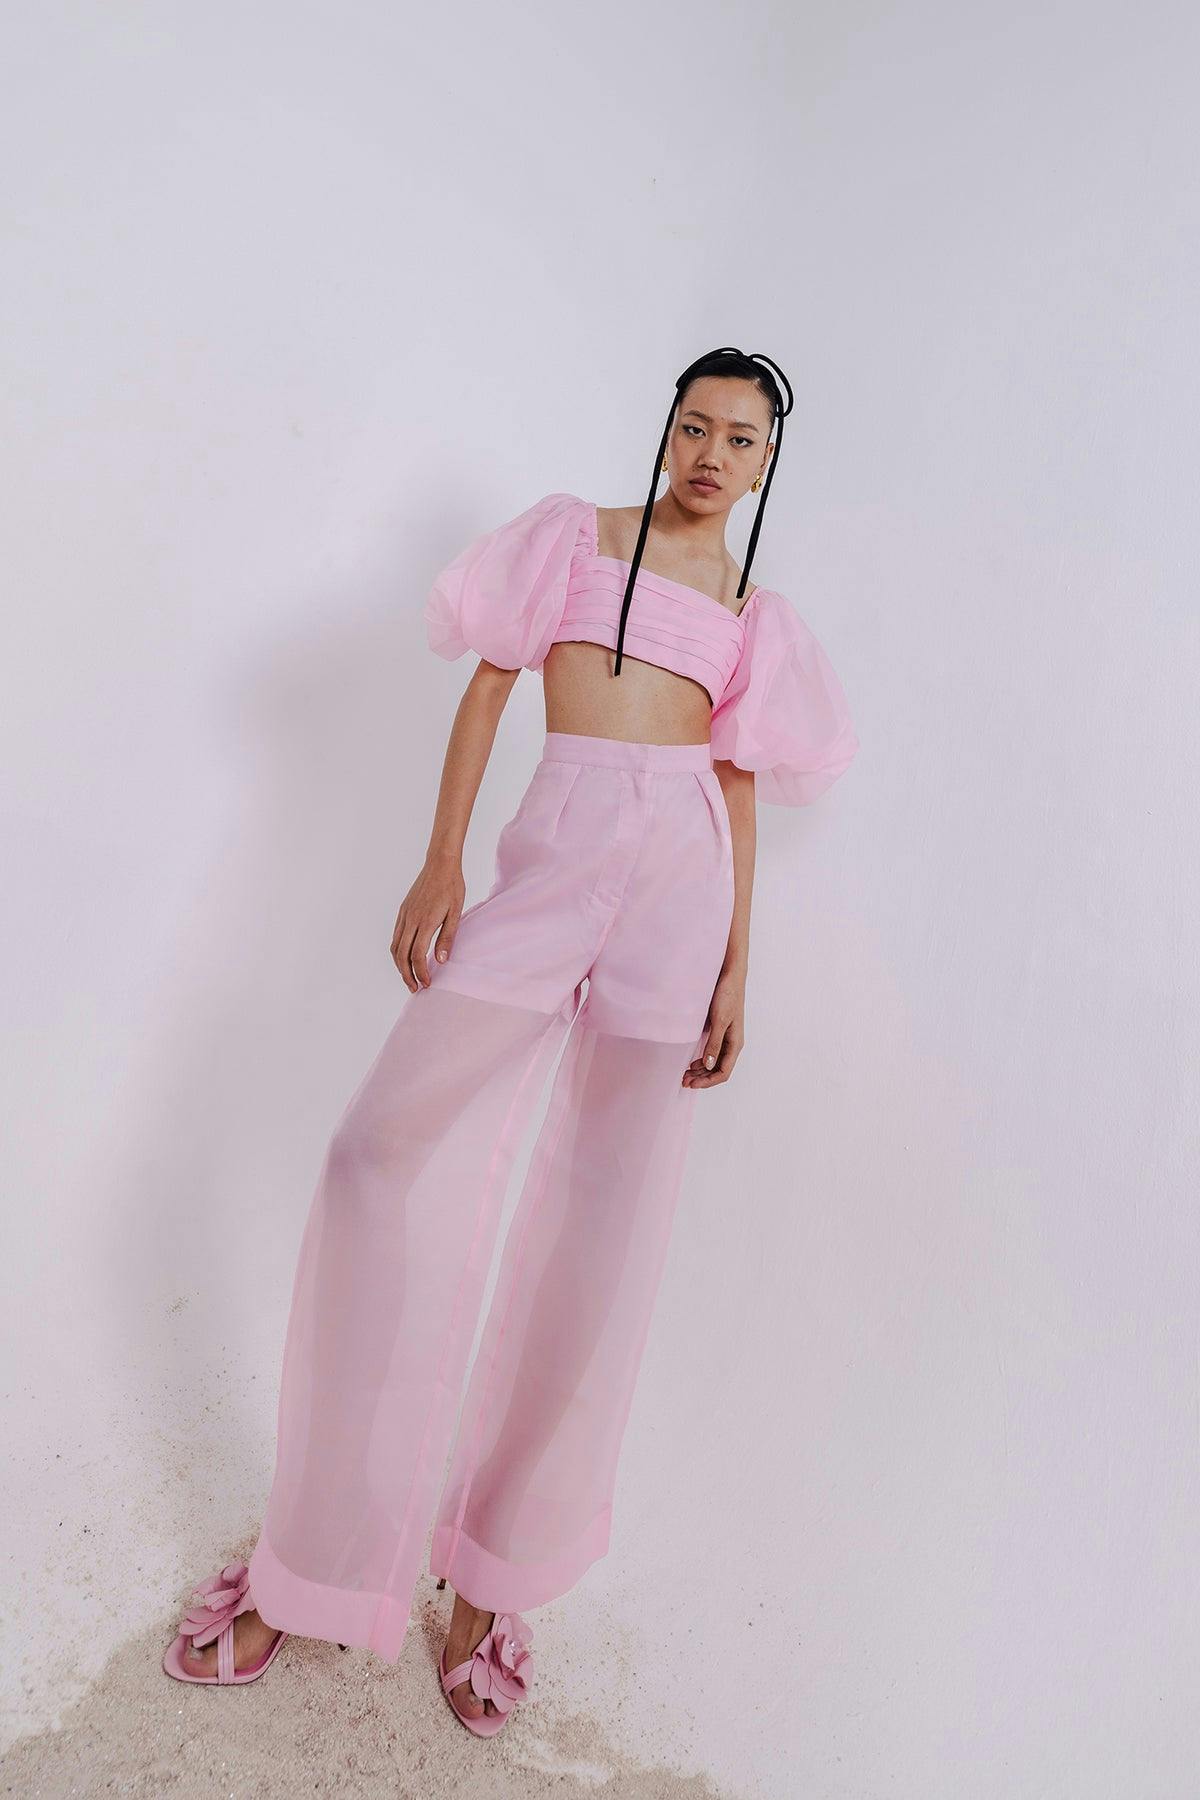 DAISY PINK CROP TOP & PANTS, a product by July Issue